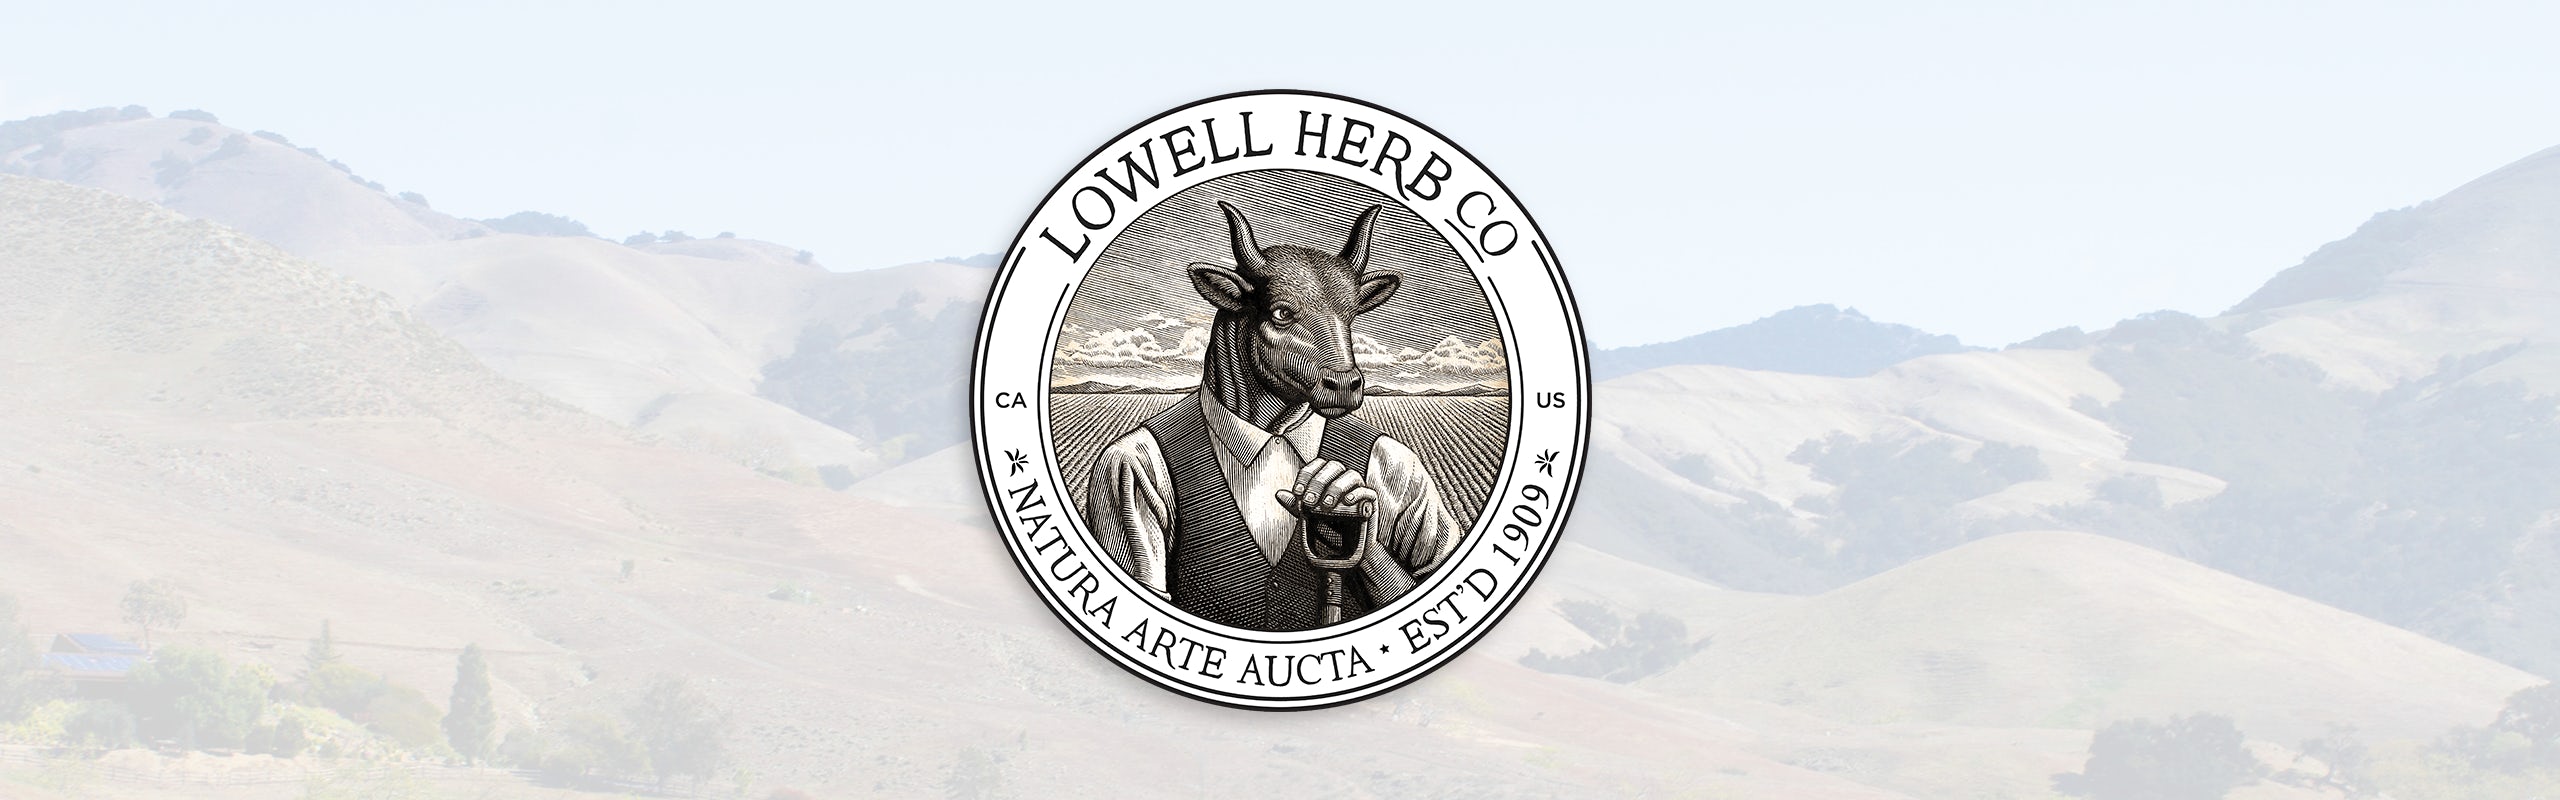 Lowell Herb Co. banner